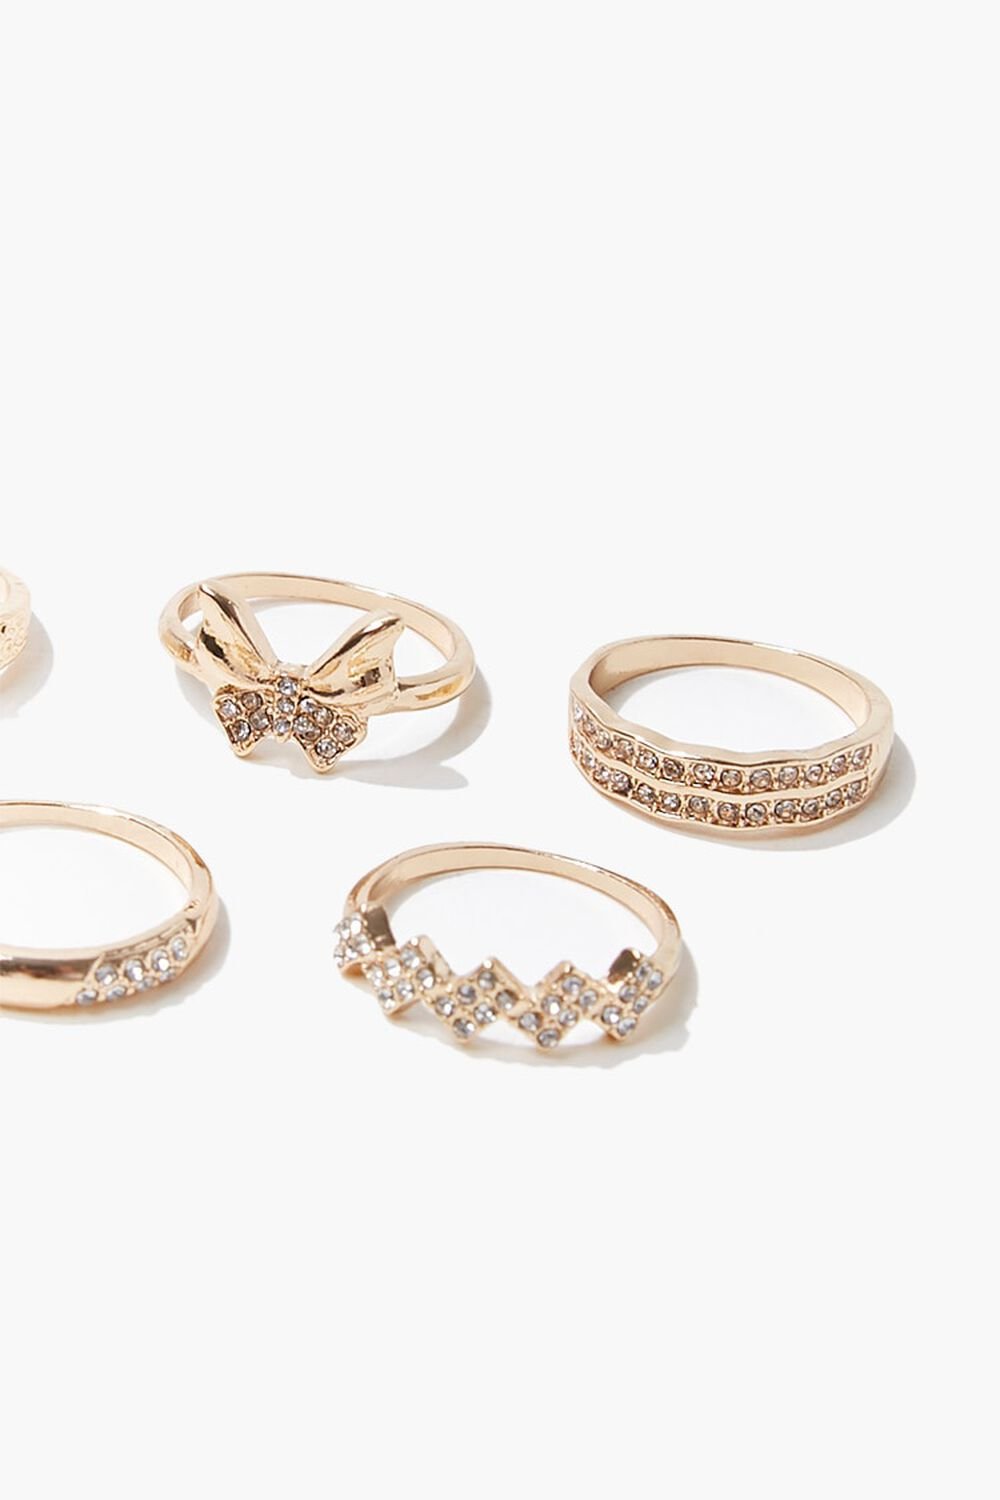 GOLD Butterfly Ring Set, image 2